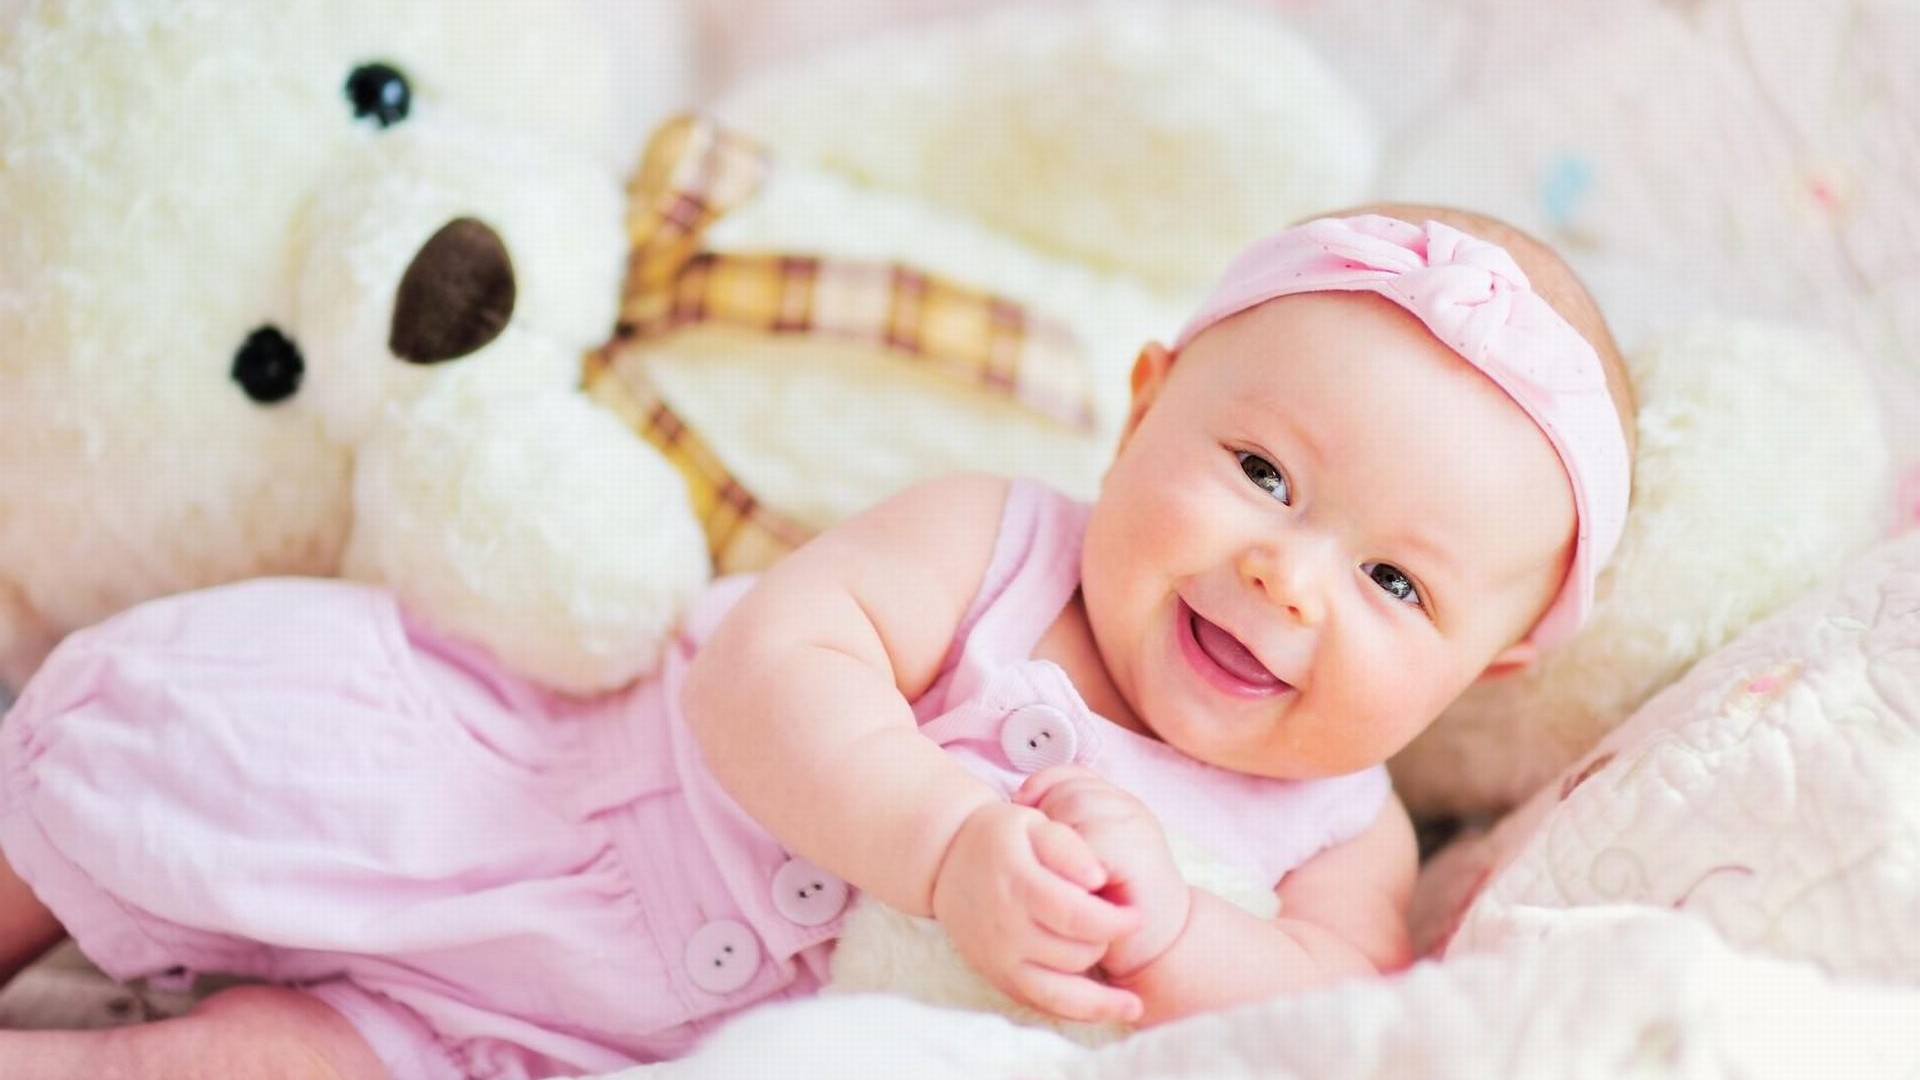 Most Beautiful Baby Girl Wallpapers | HD Pictures Images \u2013 HD ...